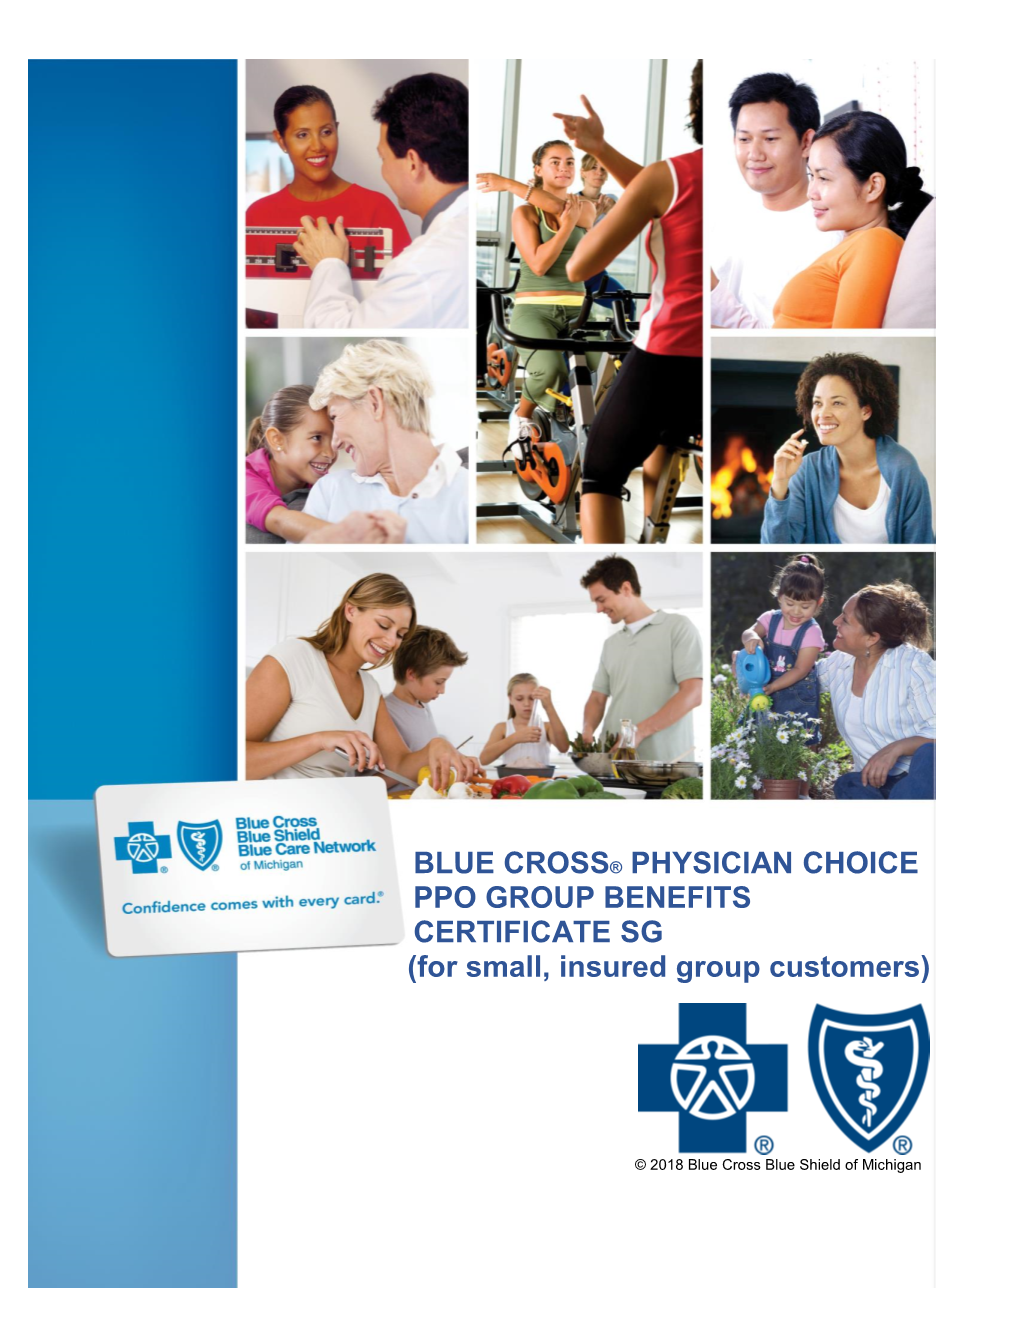 BLUE CROSS® PHYSICIAN CHOICE PPO GROUP BENEFITS CERTIFICATE SG (For Small, Insured Group Customers)